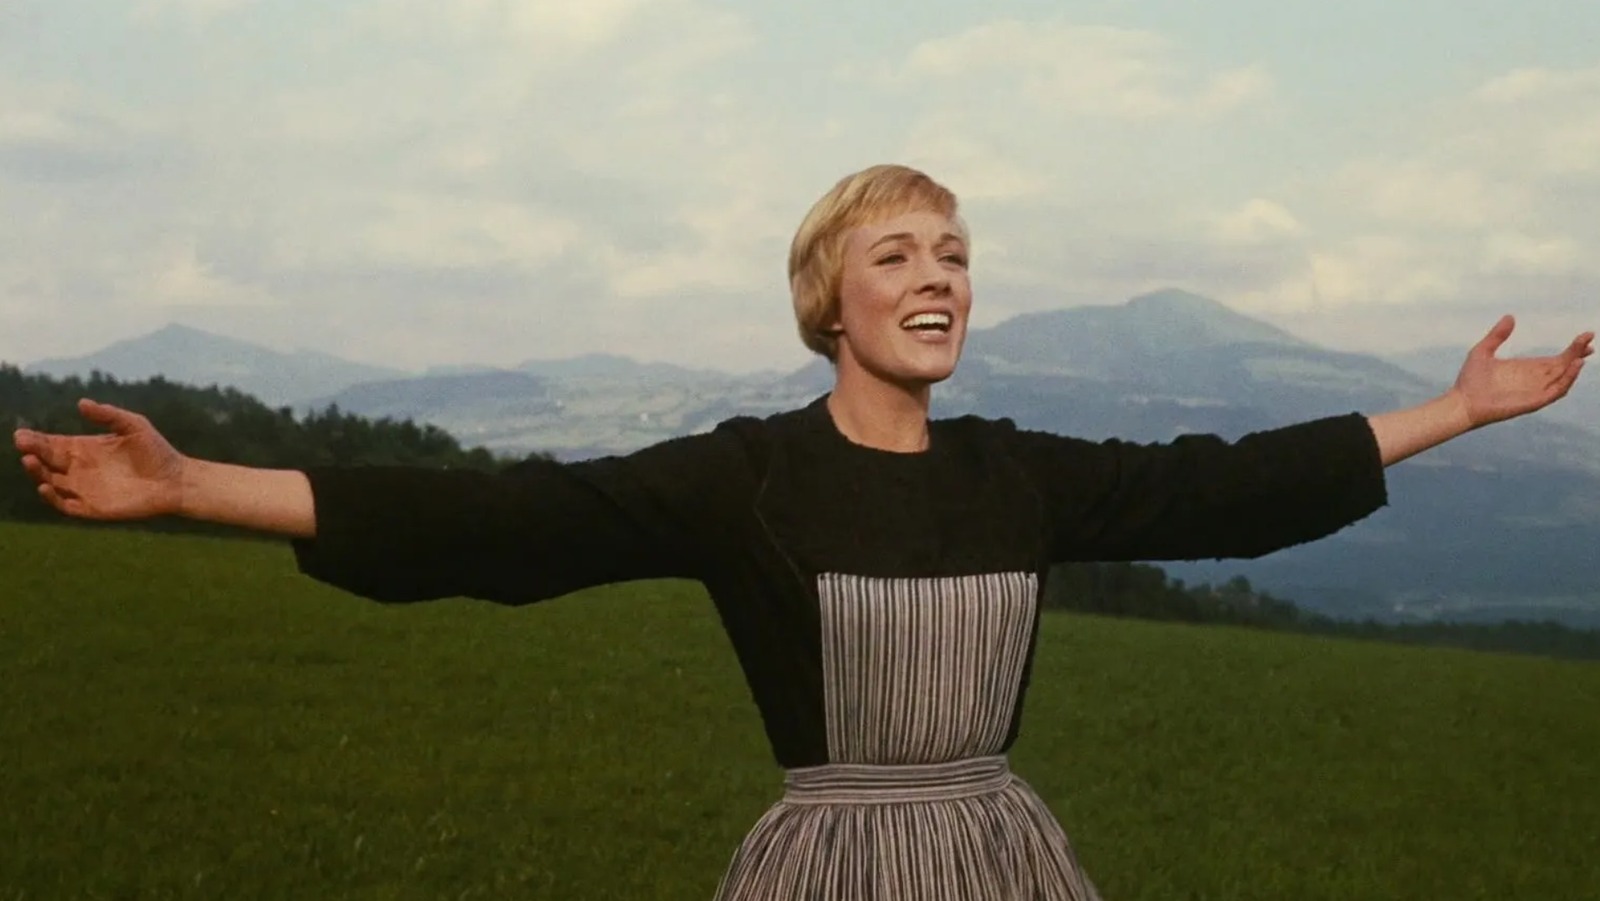 the sound of music (film)